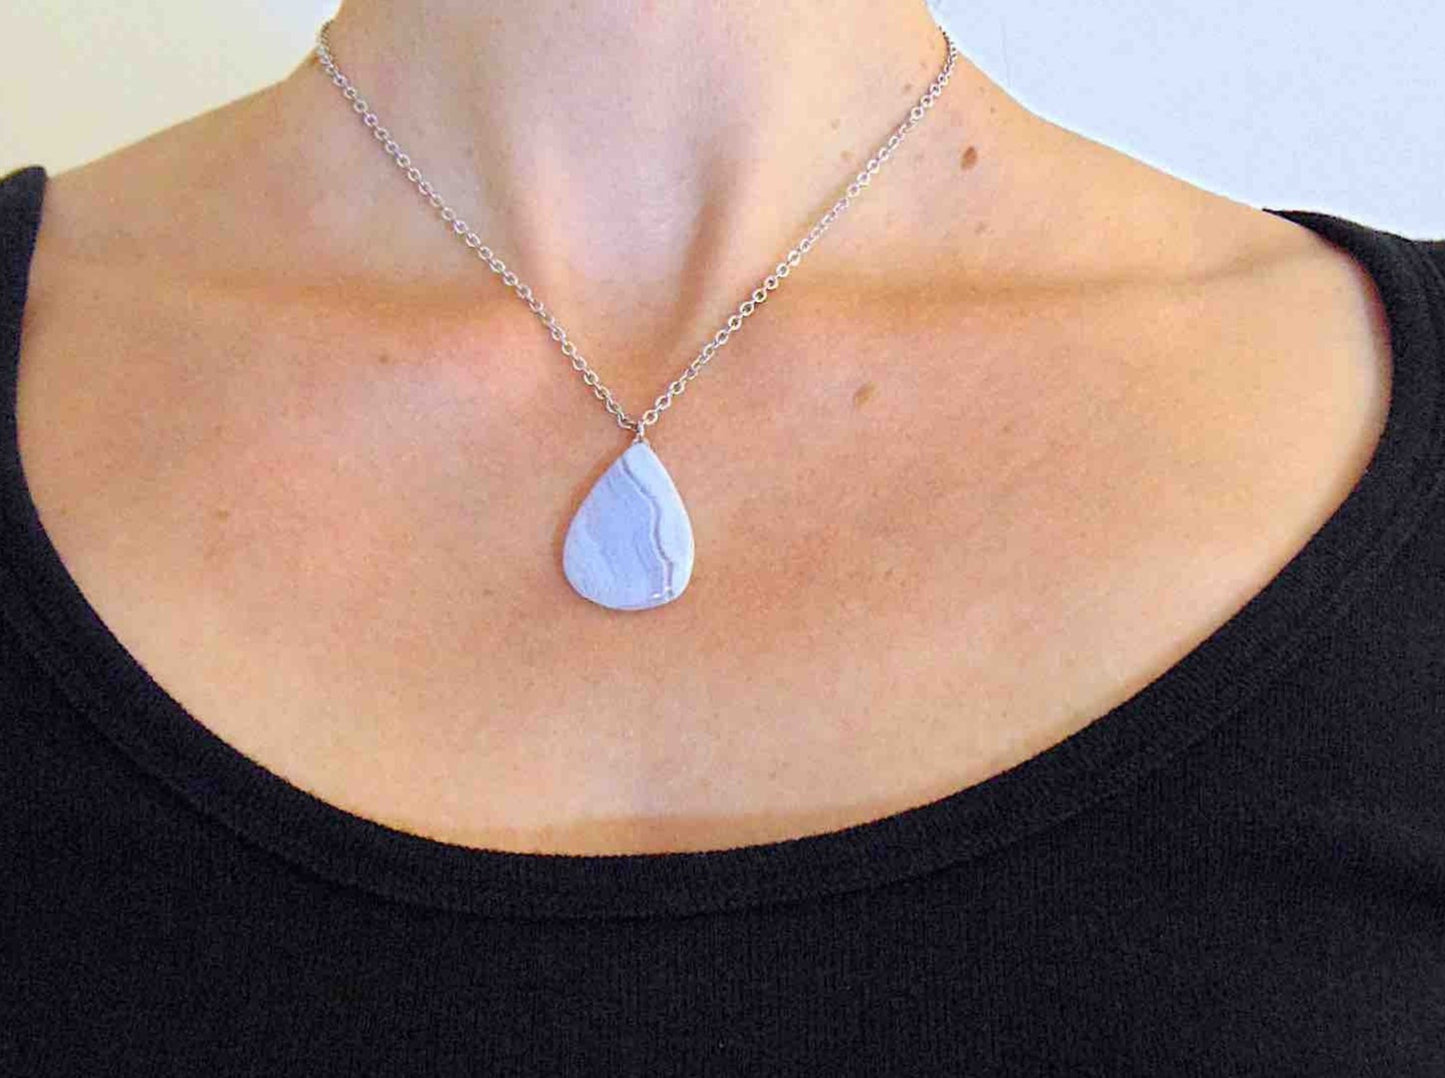 16-inch necklace with marbled blue lace agate stone drop pendant, stainless steel chain